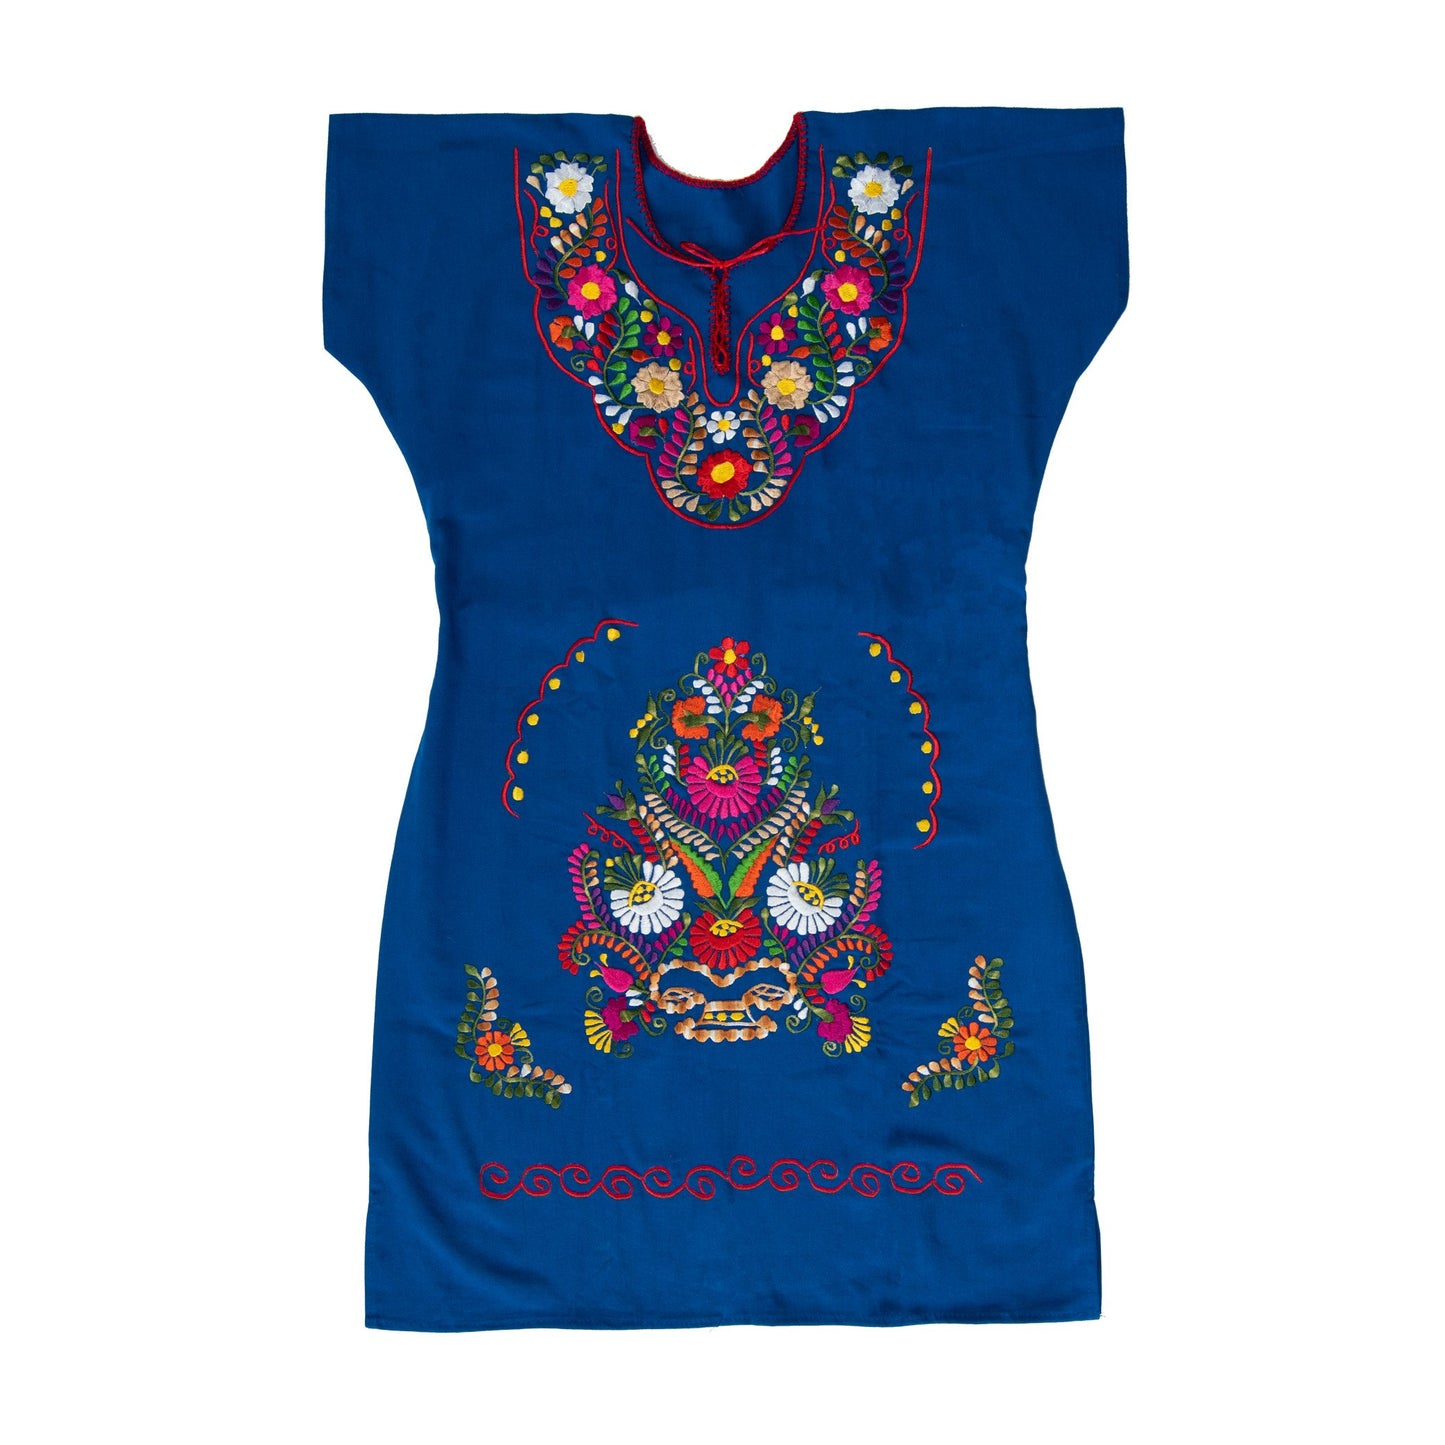 Blue Embroidered Dress - Made in Mexico